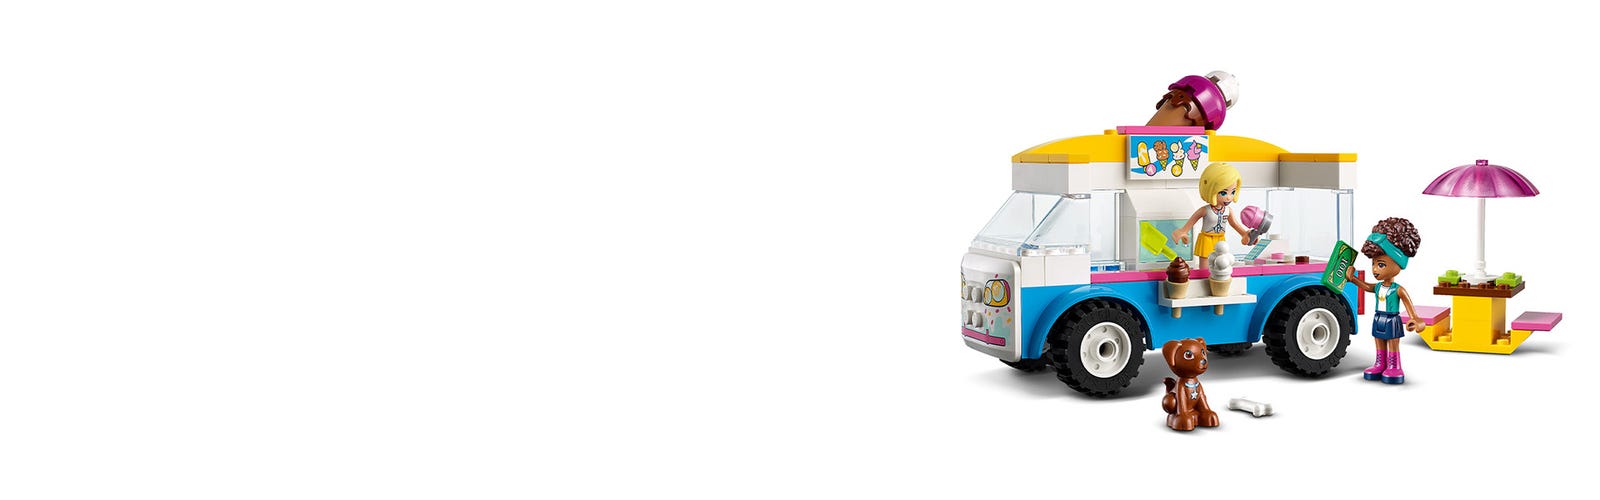 Truck | Friends online Shop 41715 Ice-Cream | Official LEGO® US Buy the at